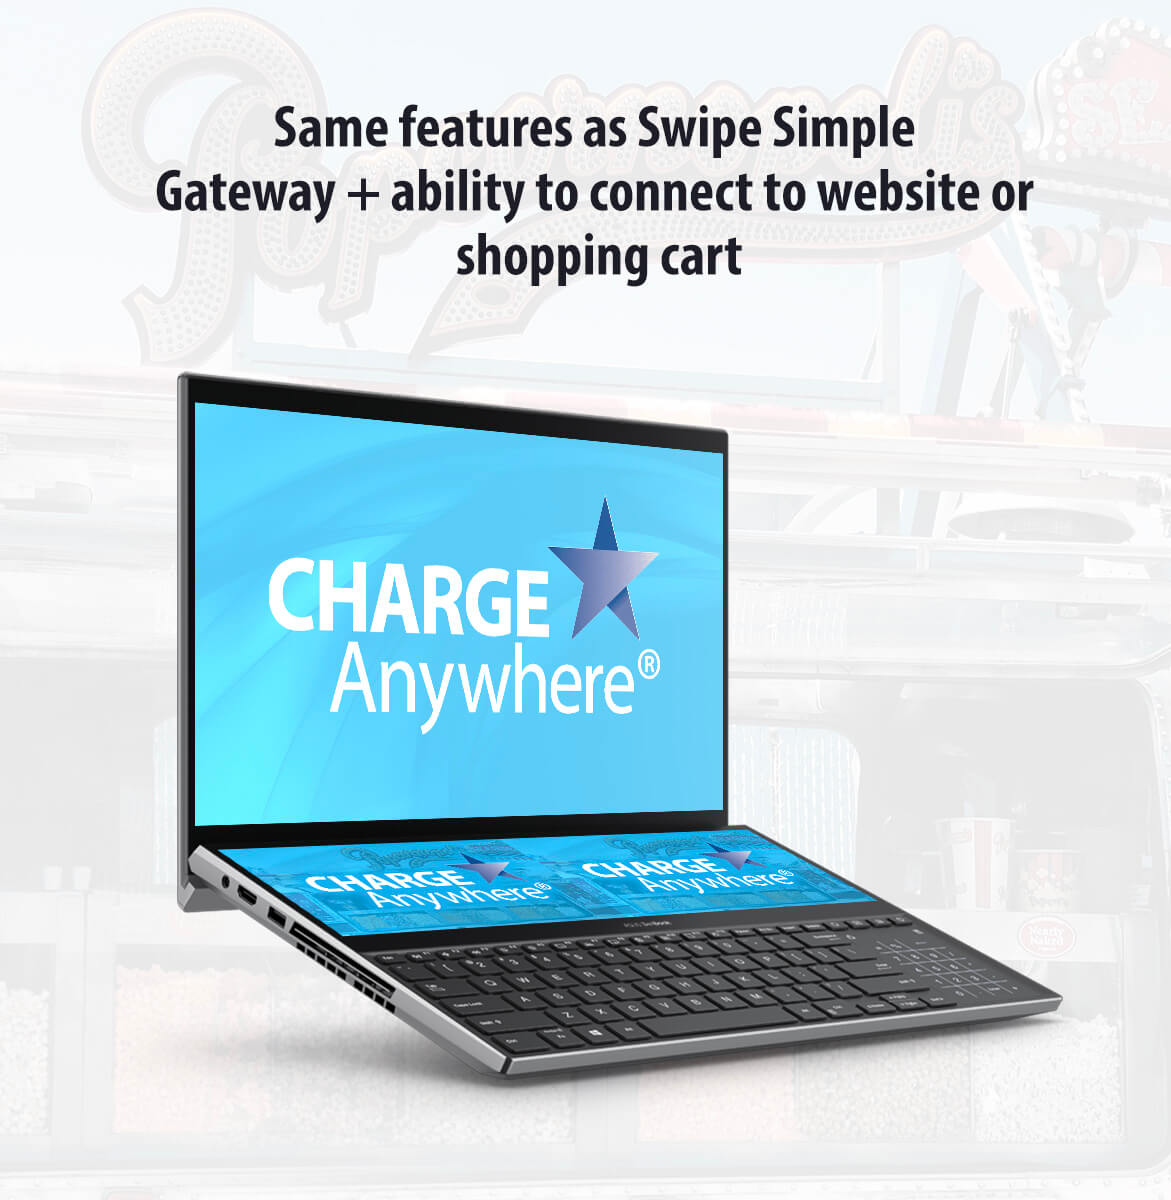 Charge Anywhere has the Same features as Swipe Simple